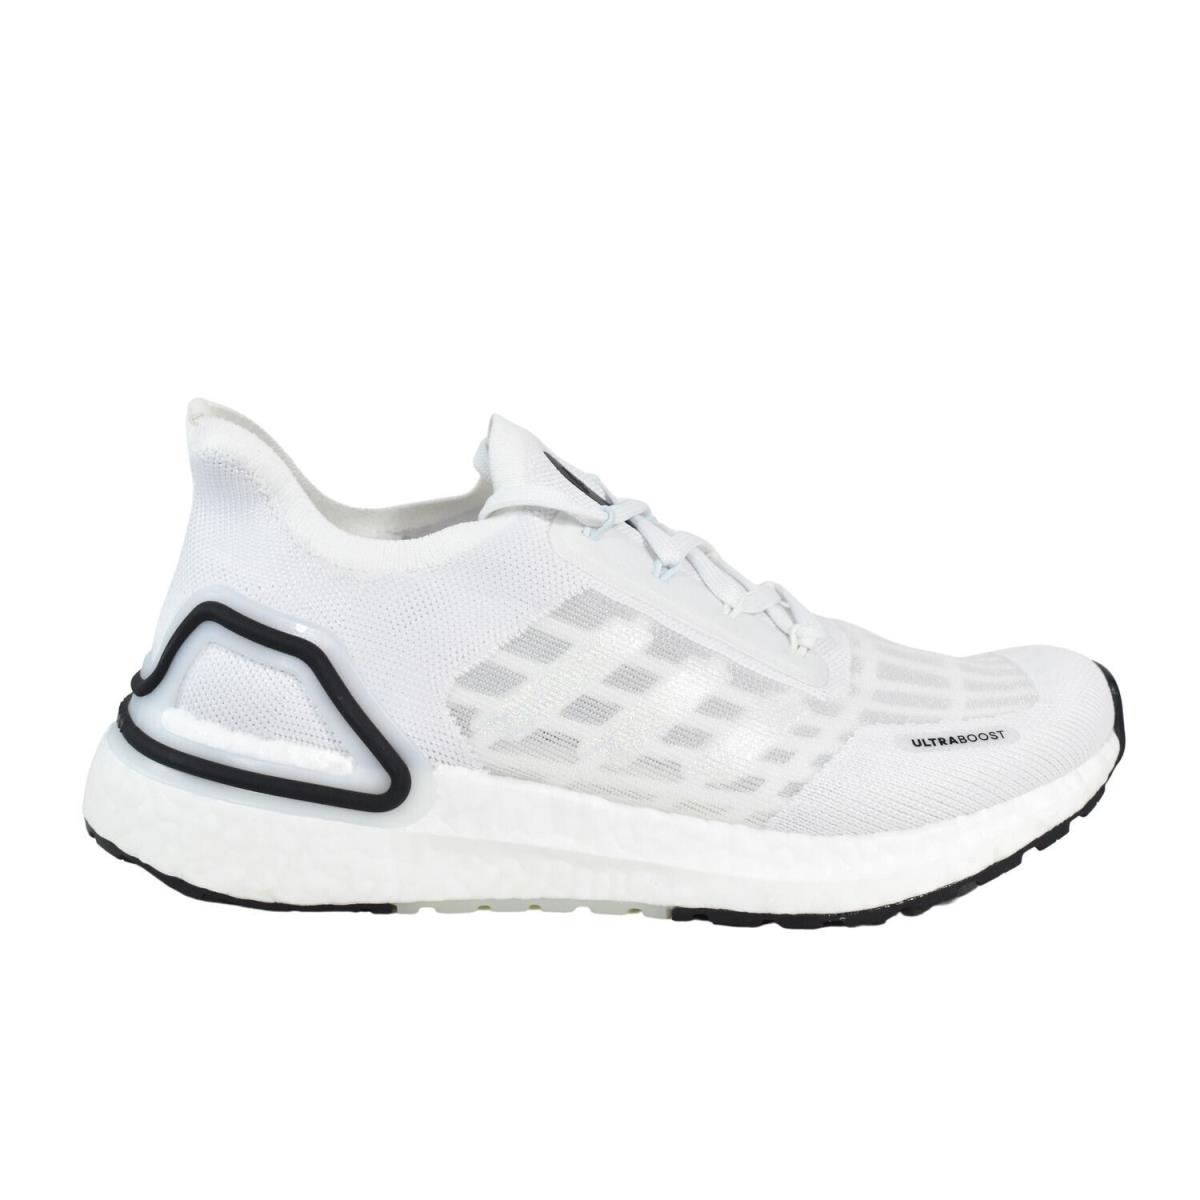 Adidas Ultraboost Summer.rdy `white Black` FY3473 Running Shoes - White